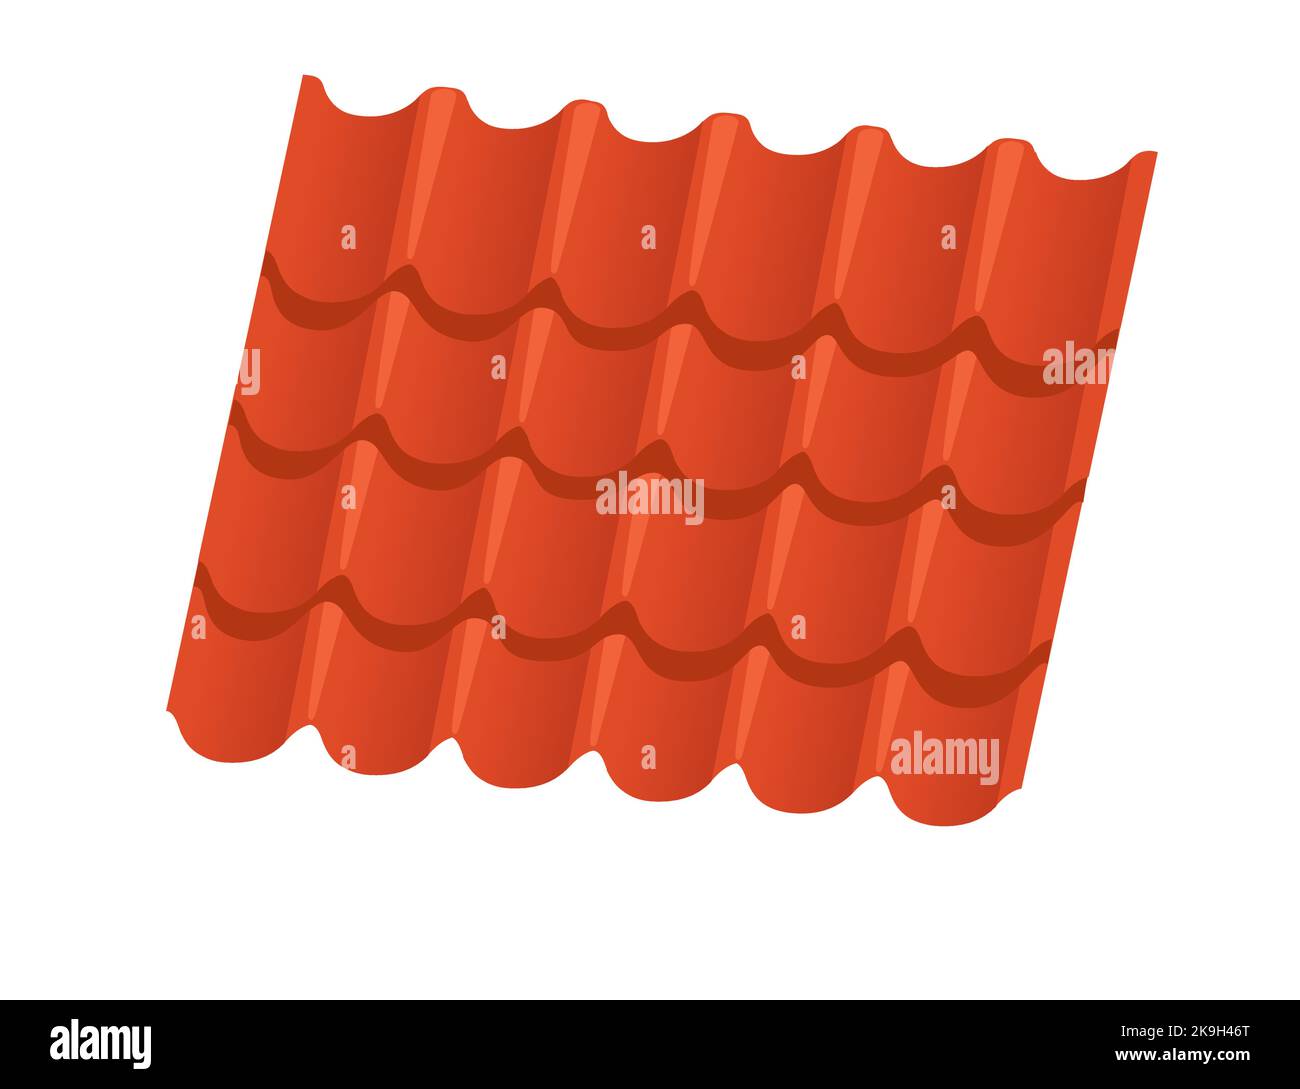 Red roof tiles vector illustration isolated on white background Stock Vector